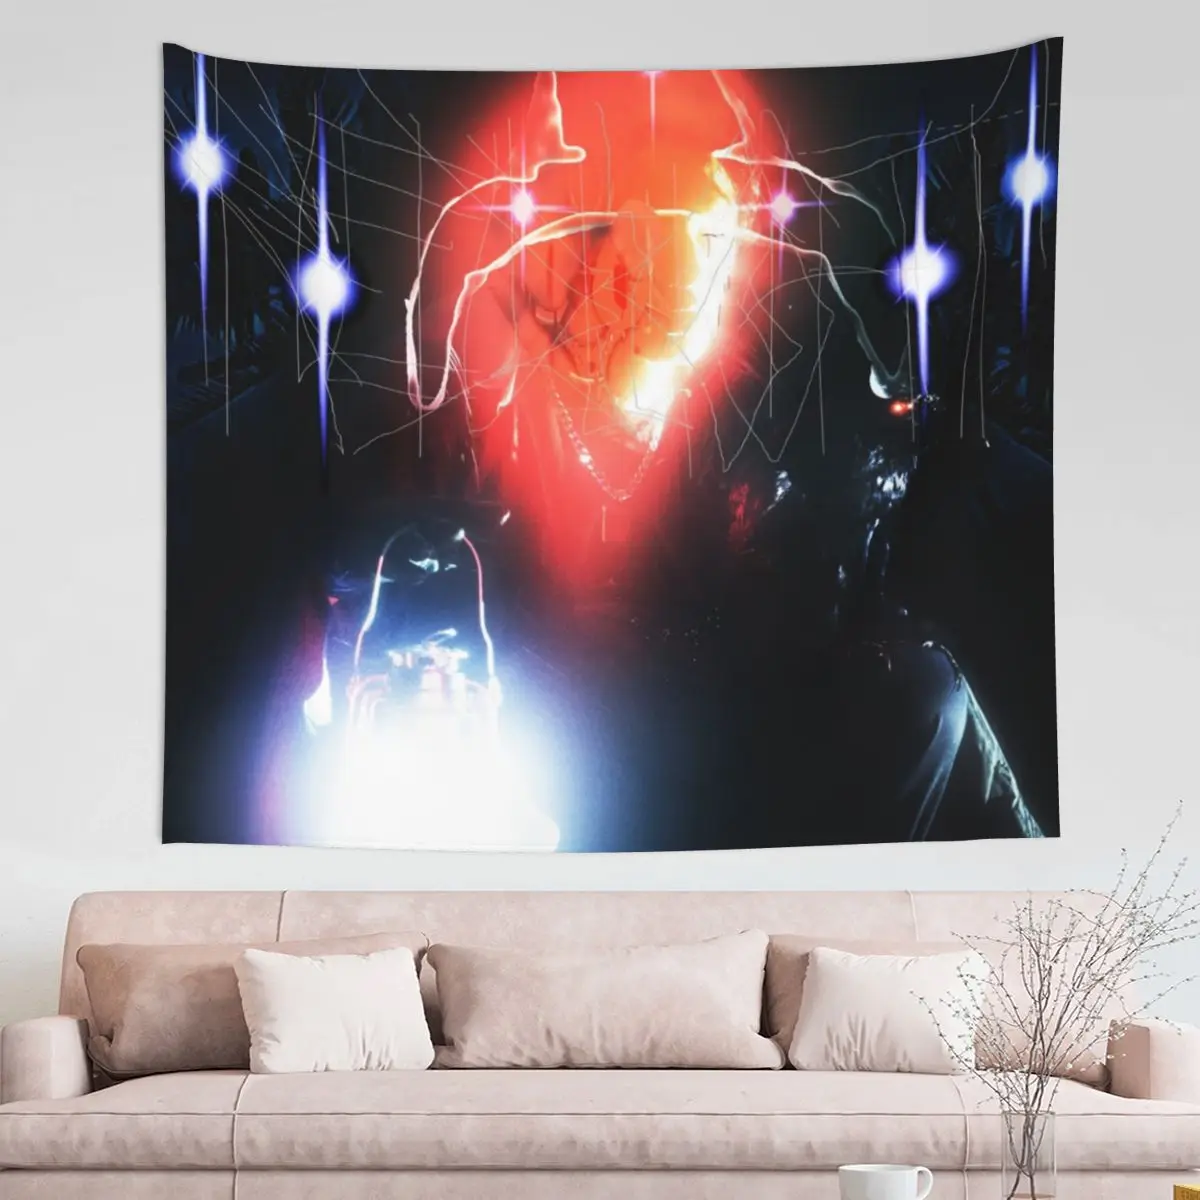 

Red Light Hq Bladee Album Cover Tapestry Wall Hanging Printed Polyester Tapestry INS Decoration Room Decor Tapiz